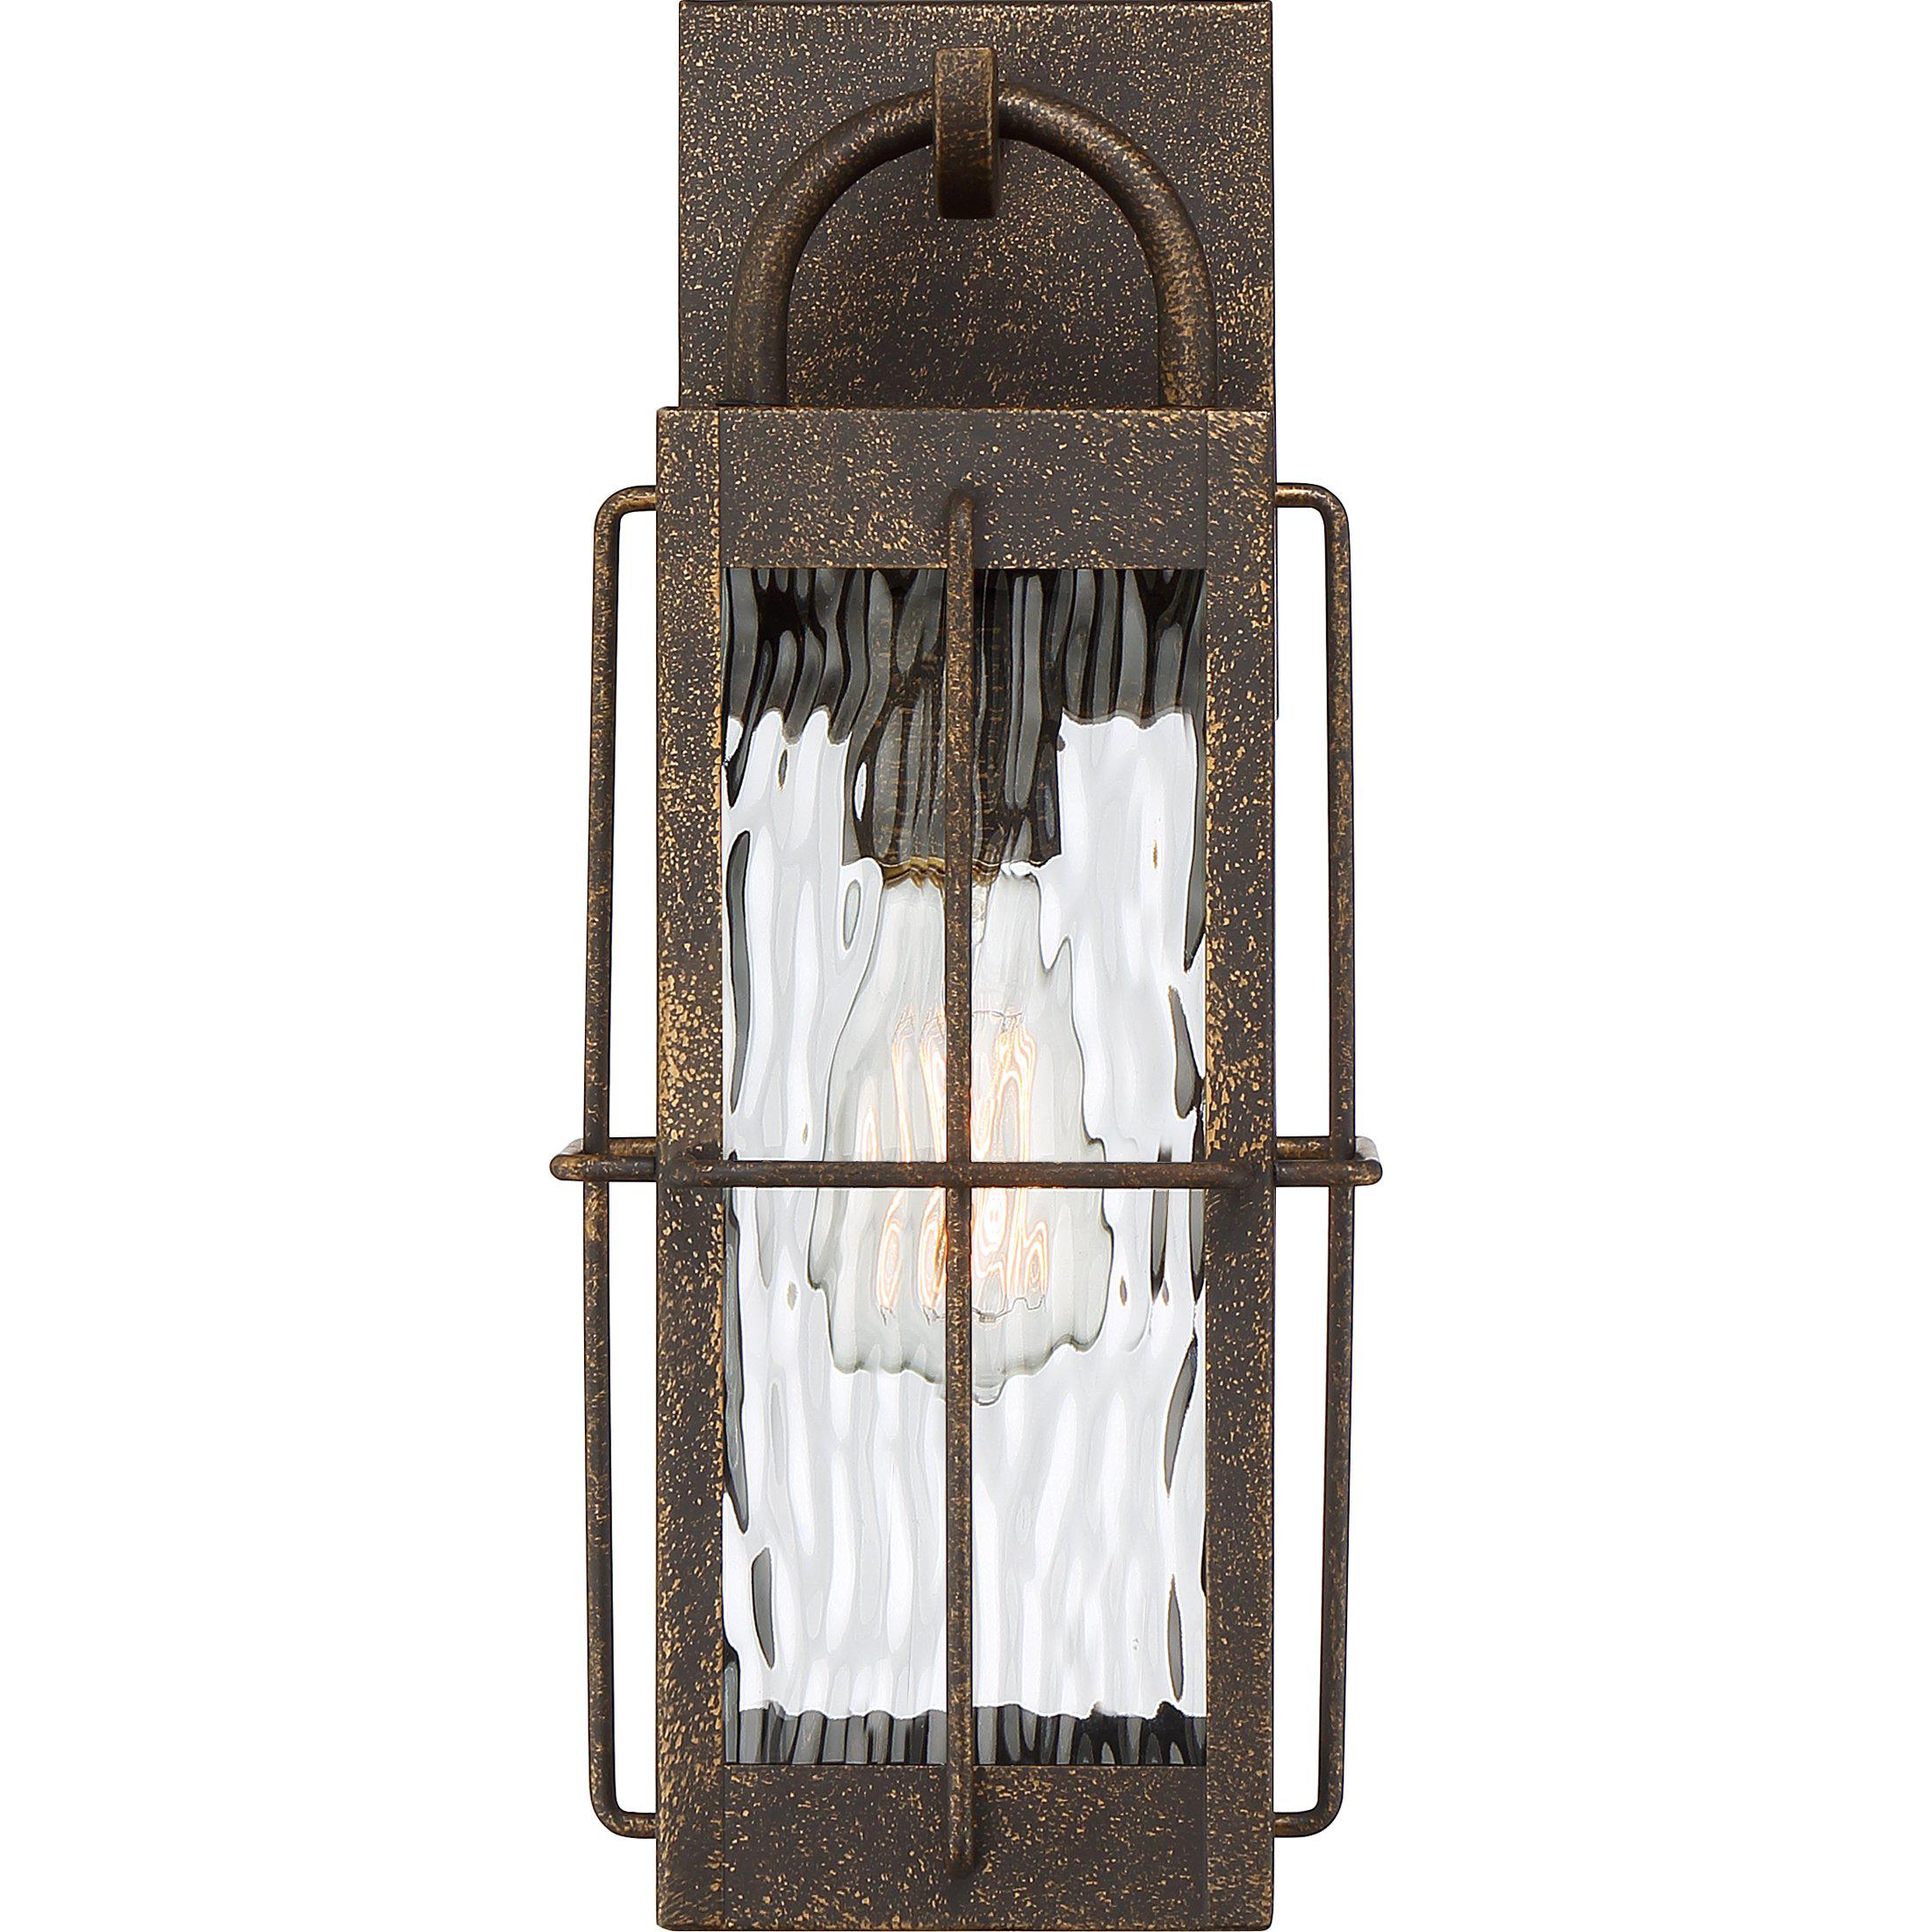 Quoizel  Ward Outdoor Lantern, Small Outdoor l Wall Quoizel   